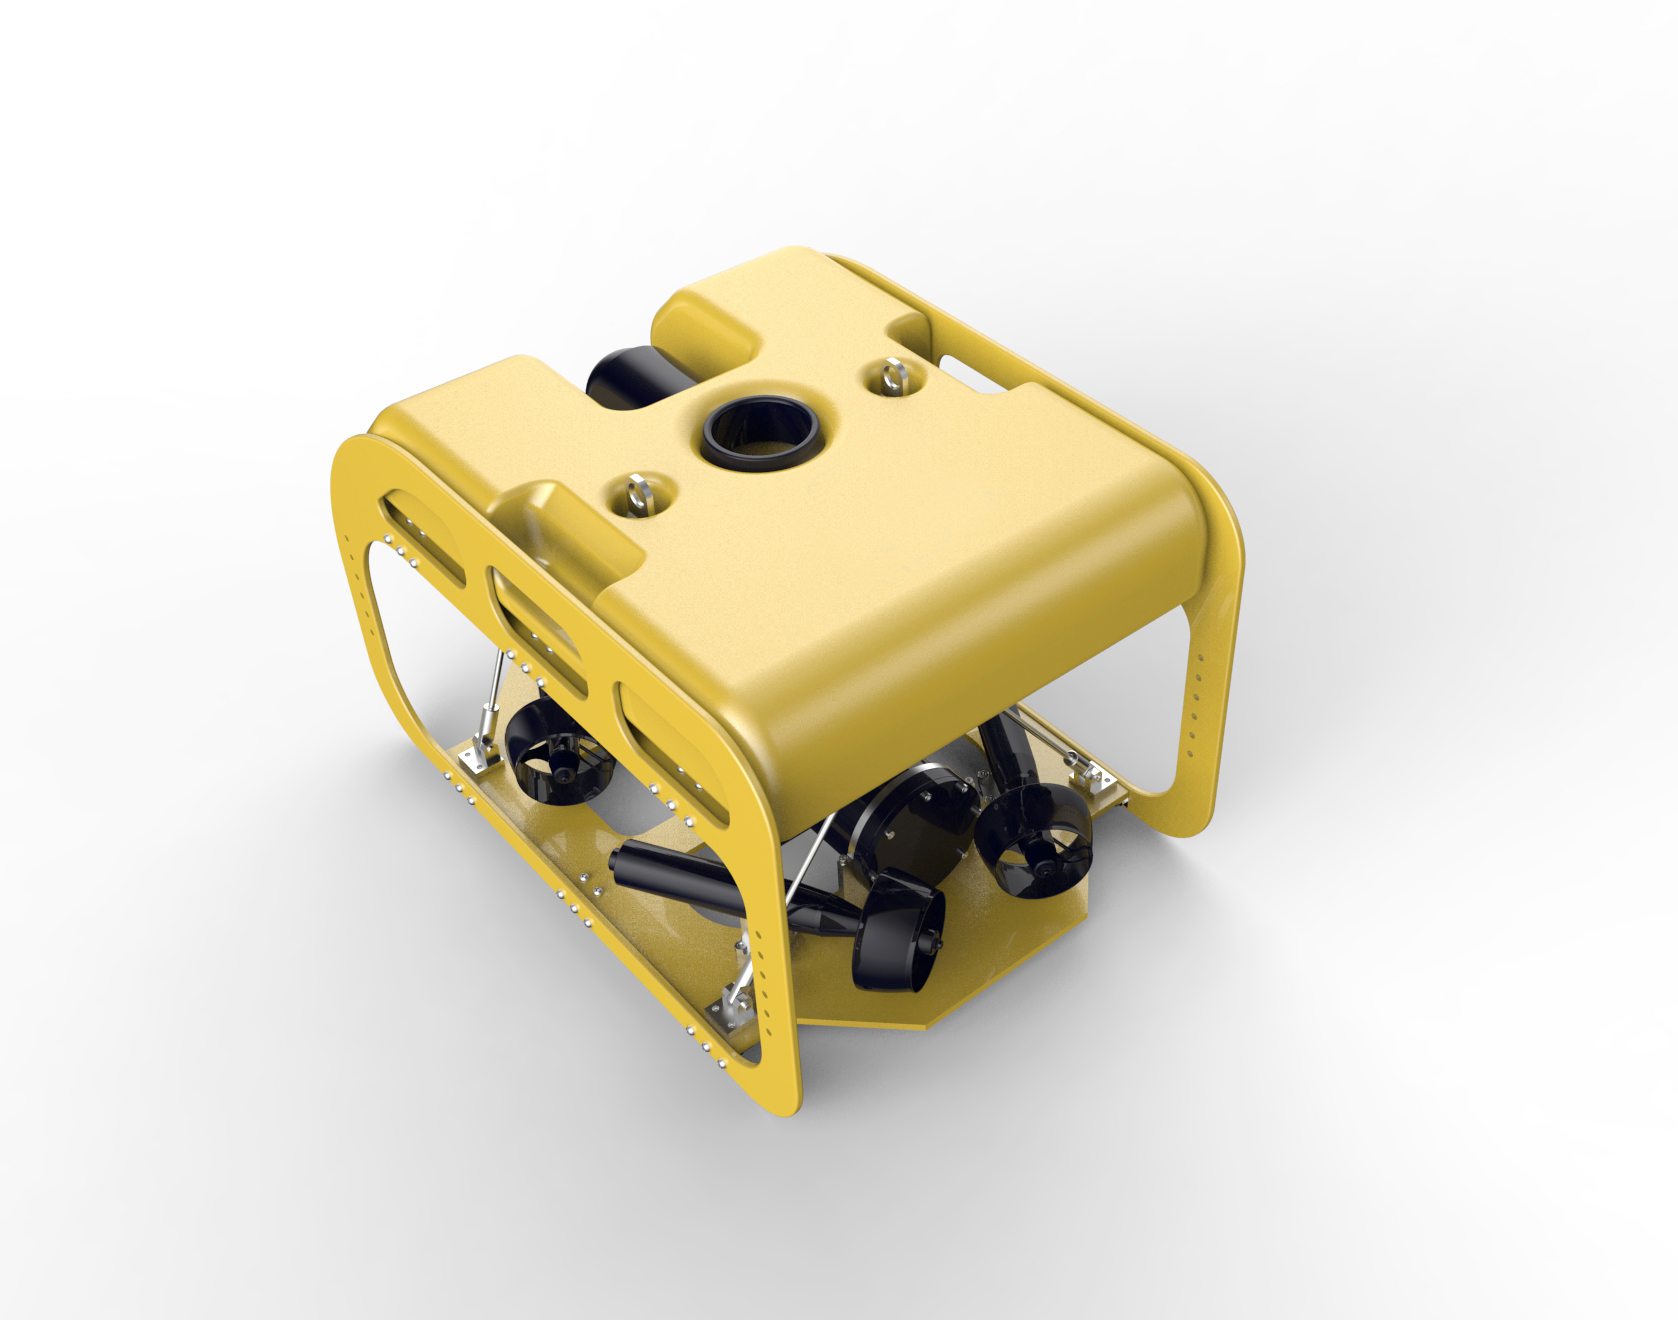 OB60 Type Remotely Operated Vehicle